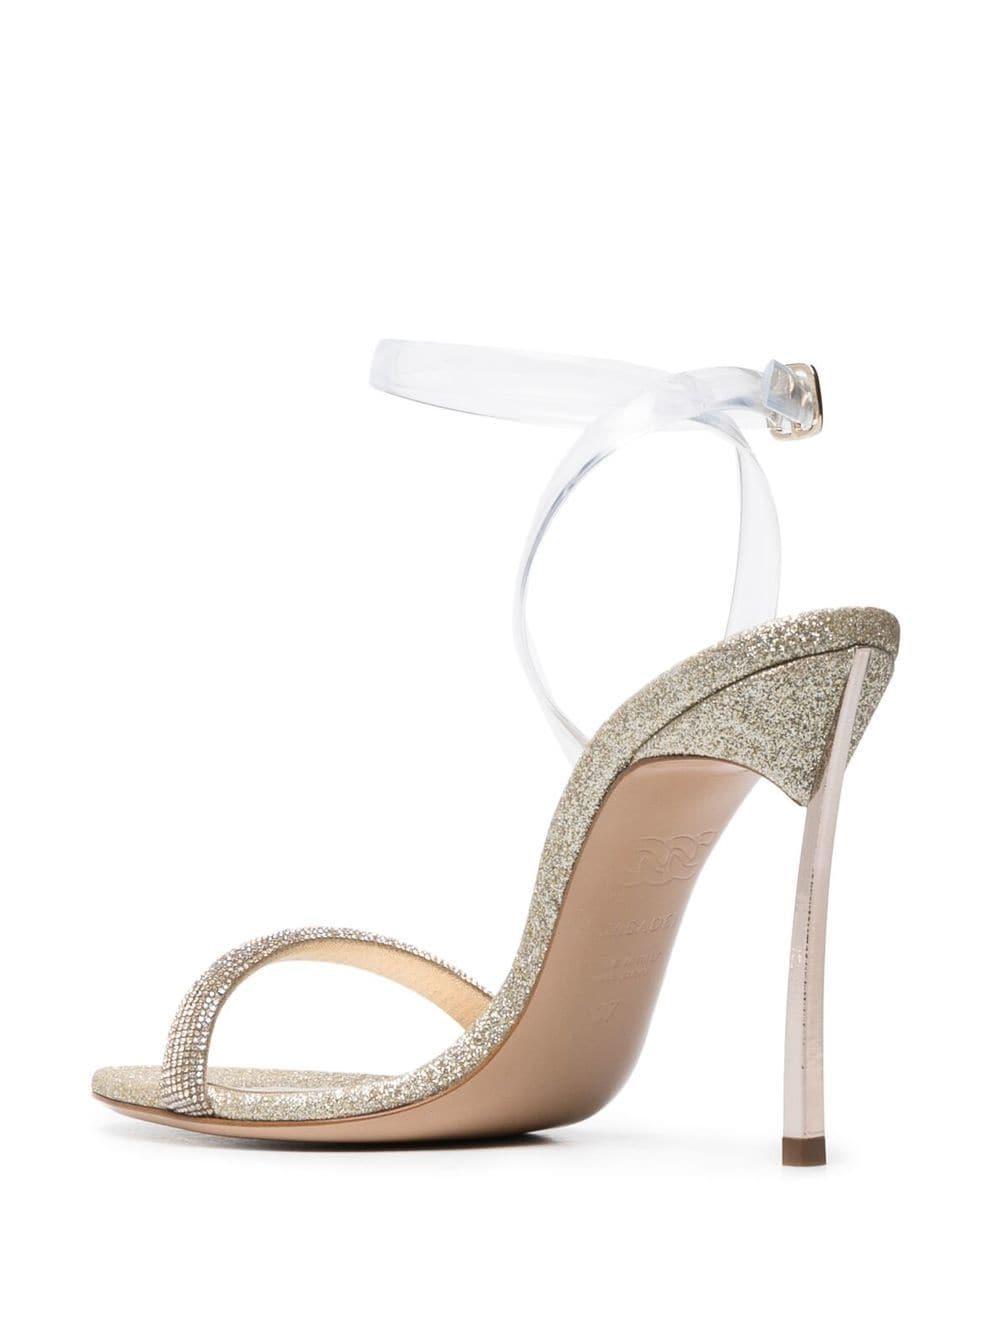 Casadei Shoes in White